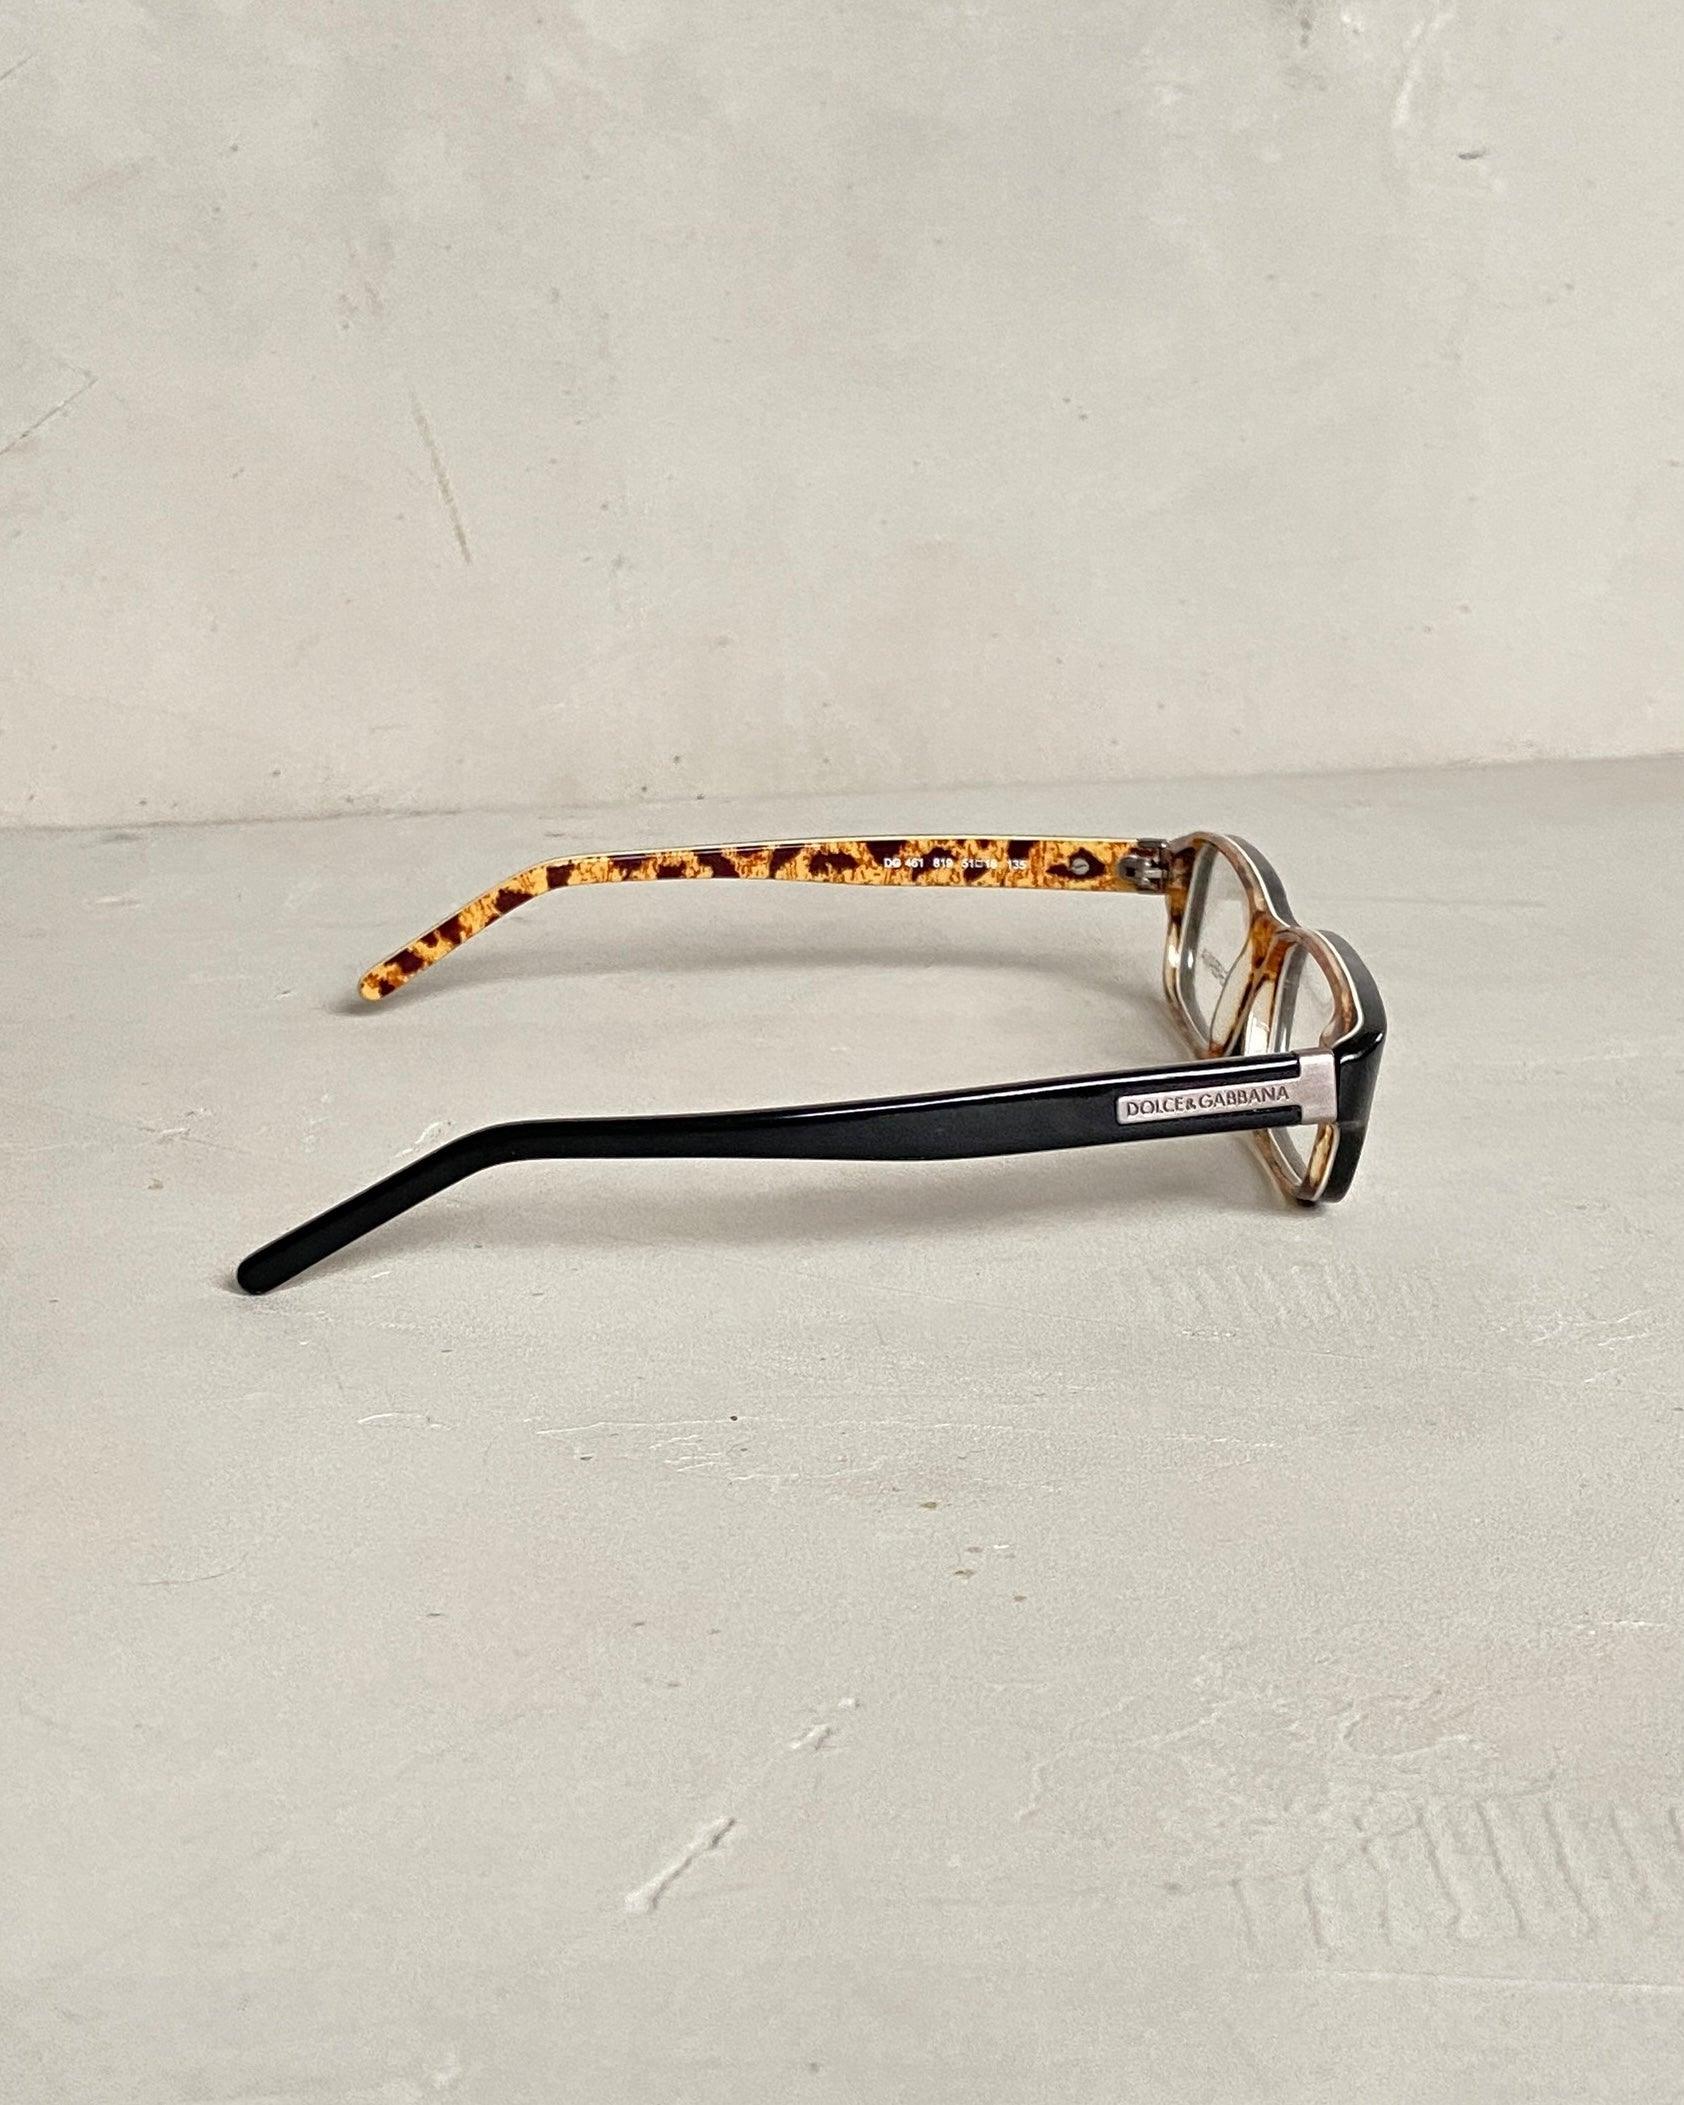 DOLCE AND GABBANA D&G 90'S BAYONETTA GLASSES - Known Source